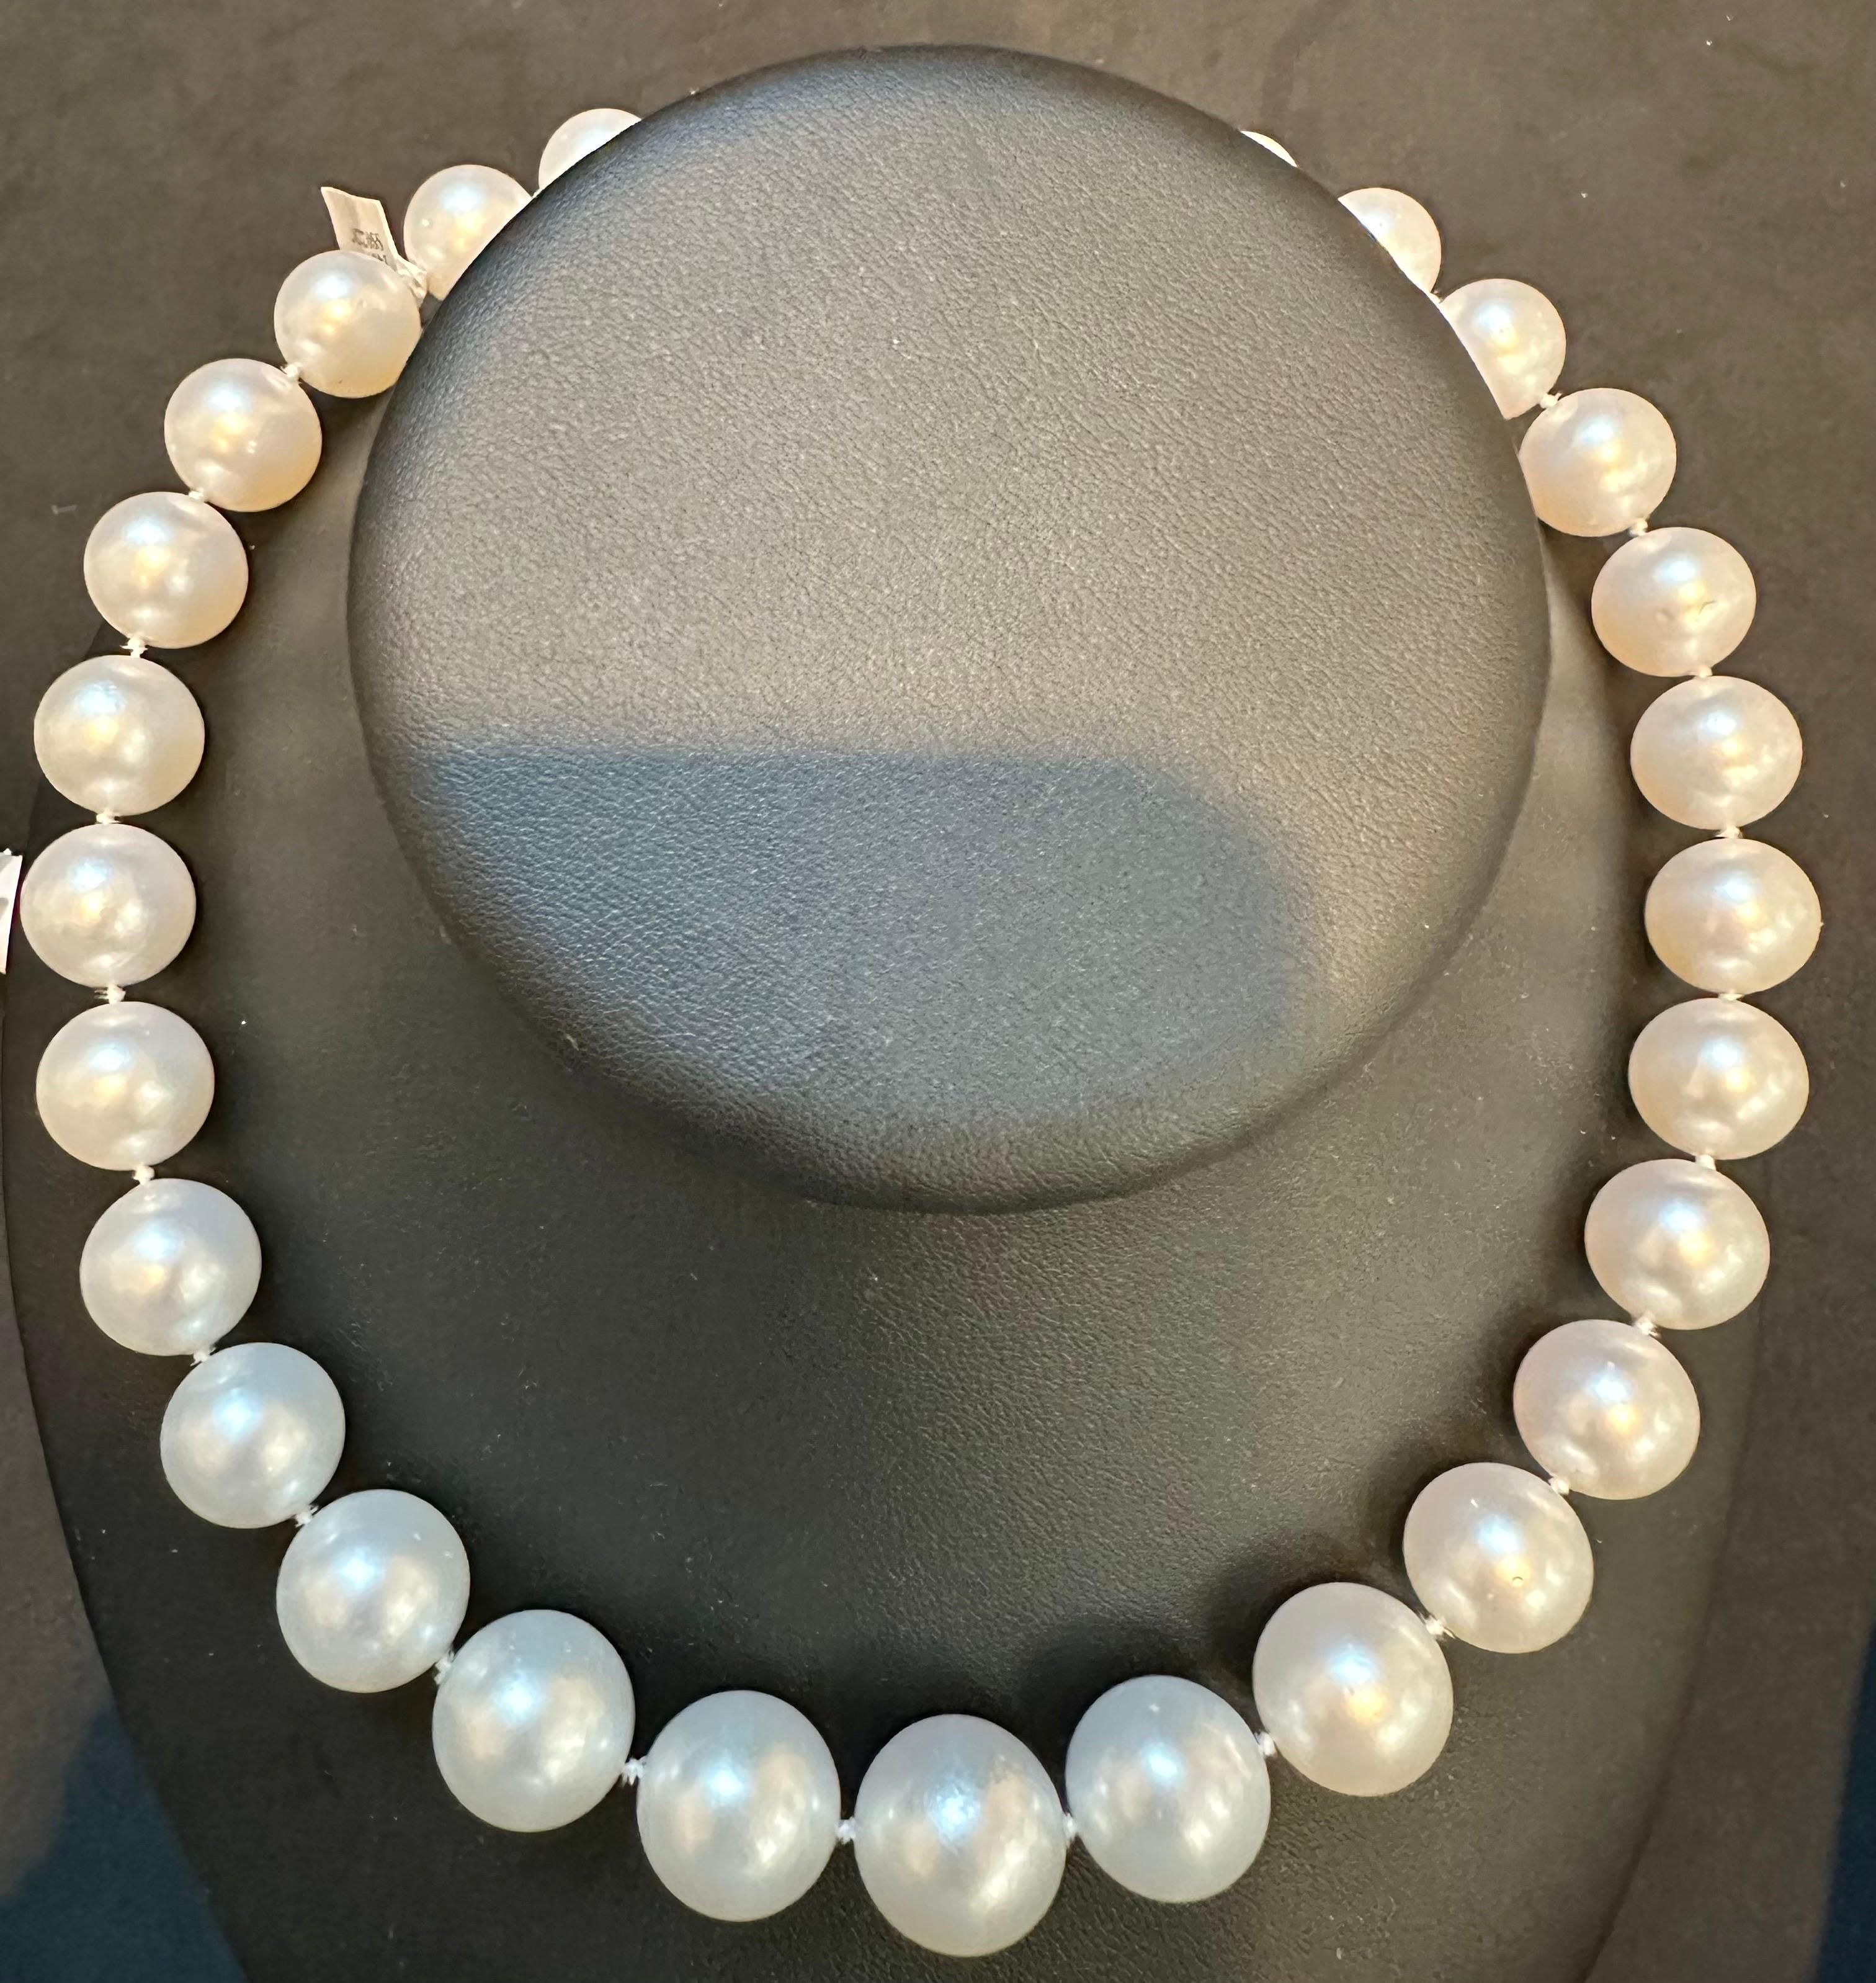 13-16.5mm White South Sea Round Pearl Necklace - AAA Quality, 29 Pieces +Diamond For Sale 3